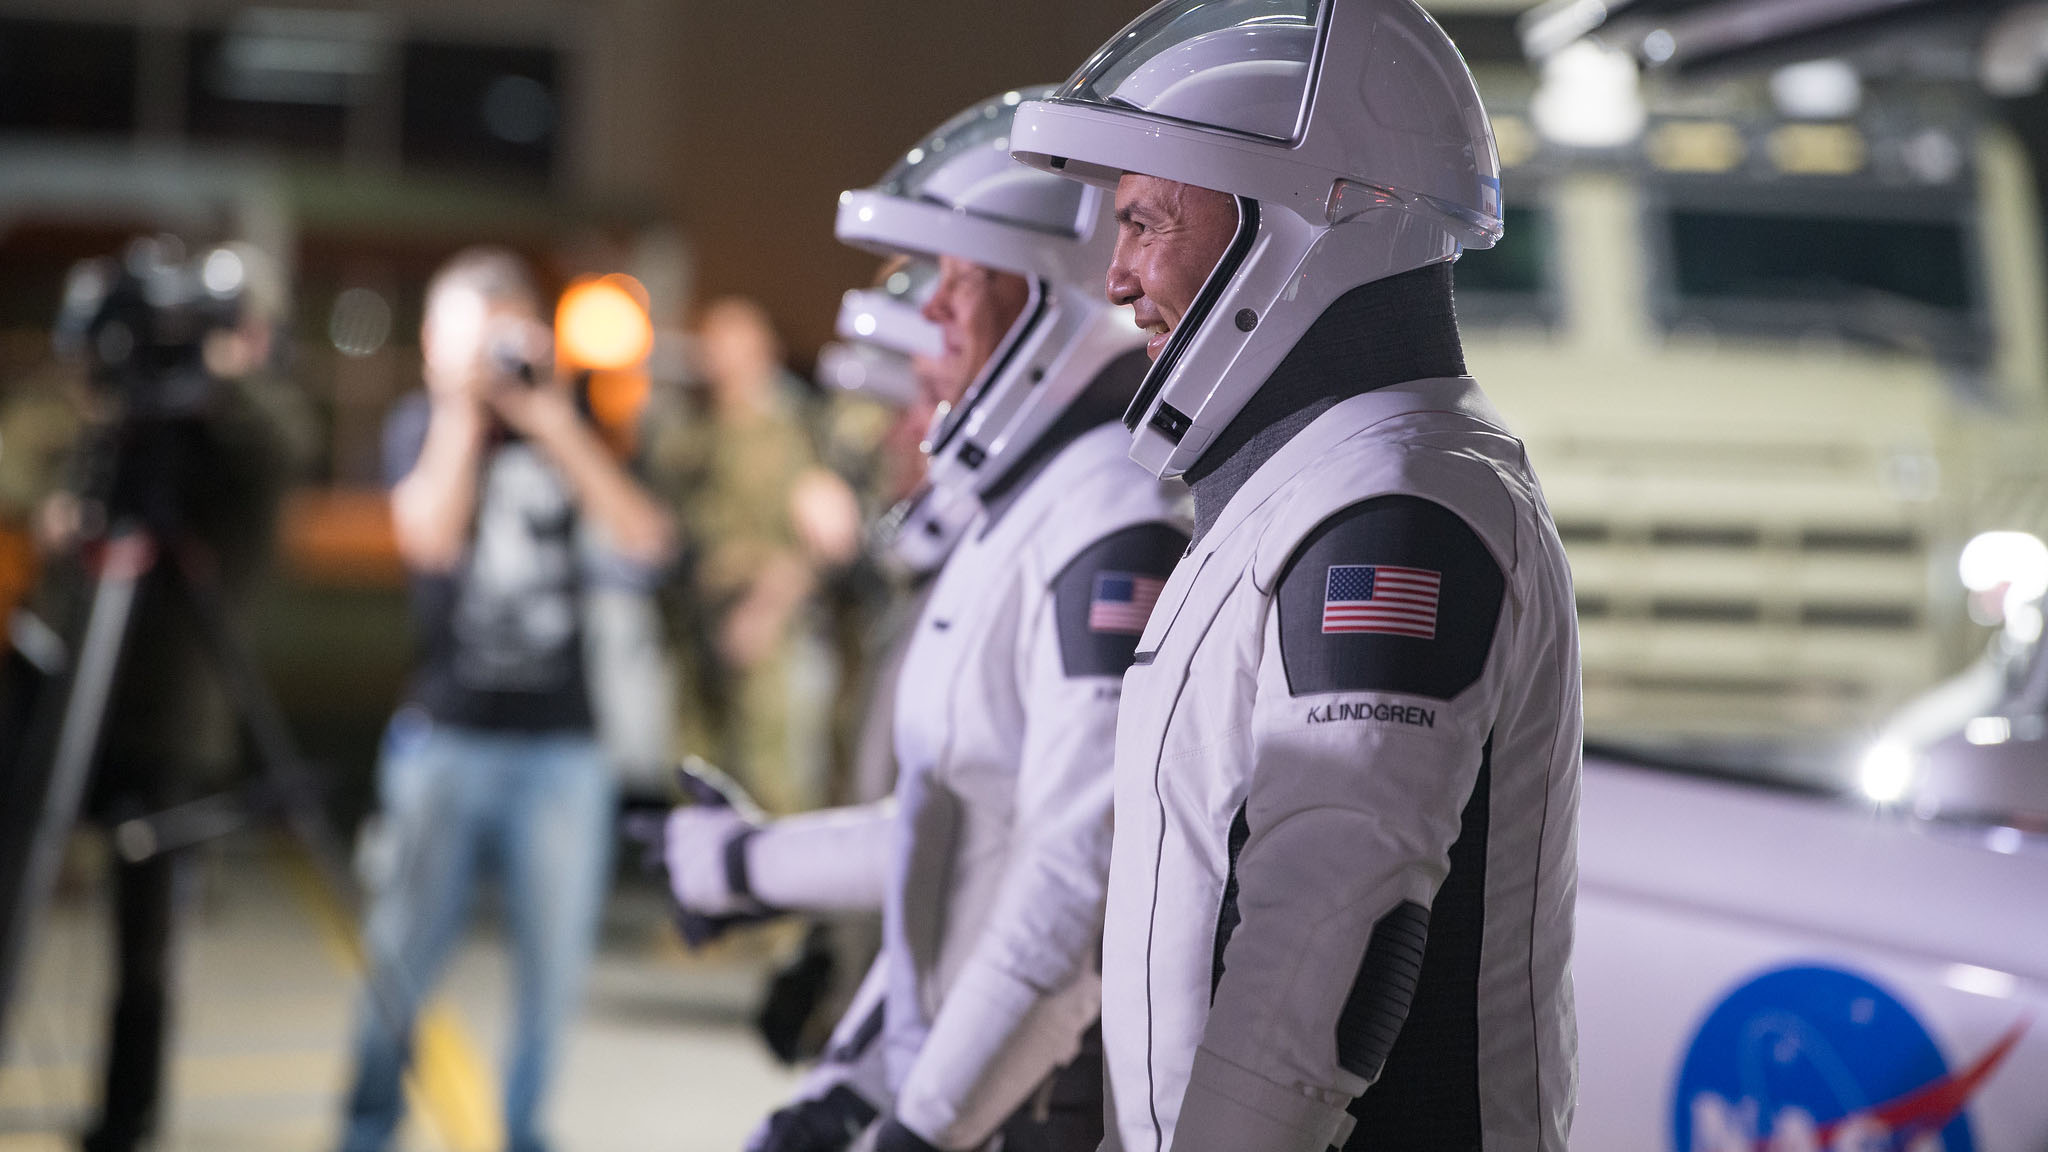 From right to left, NASA astronauts Kjell Lindgren, Robert Hines, Jessica Watkins, and ESA (European Space Agency) astronaut Samantha Cristoforetti, wearing SpaceX spacesuits, are seen as they prepare to depart the Neil A. Armstrong Operations and Checkout Building for Launch Complex 39A to board the SpaceX Crew Dragon spacecraft for the Crew-4 mission launch, Tuesday, April 26, 2022, at NASA’s Kennedy Space Center in Florida.